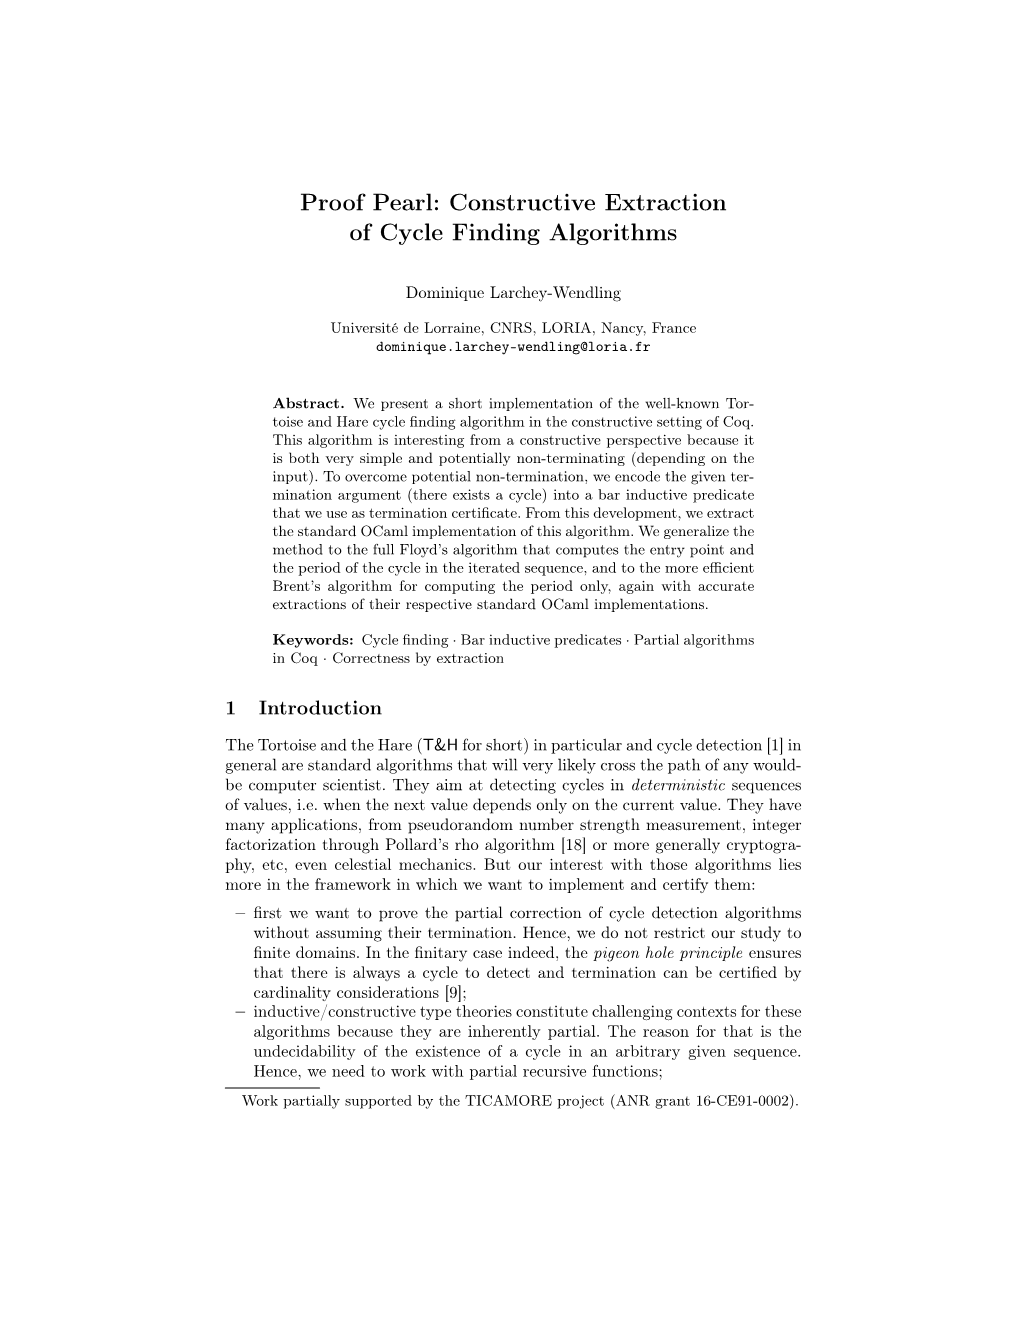 Proof Pearl: Constructive Extraction of Cycle Finding Algorithms